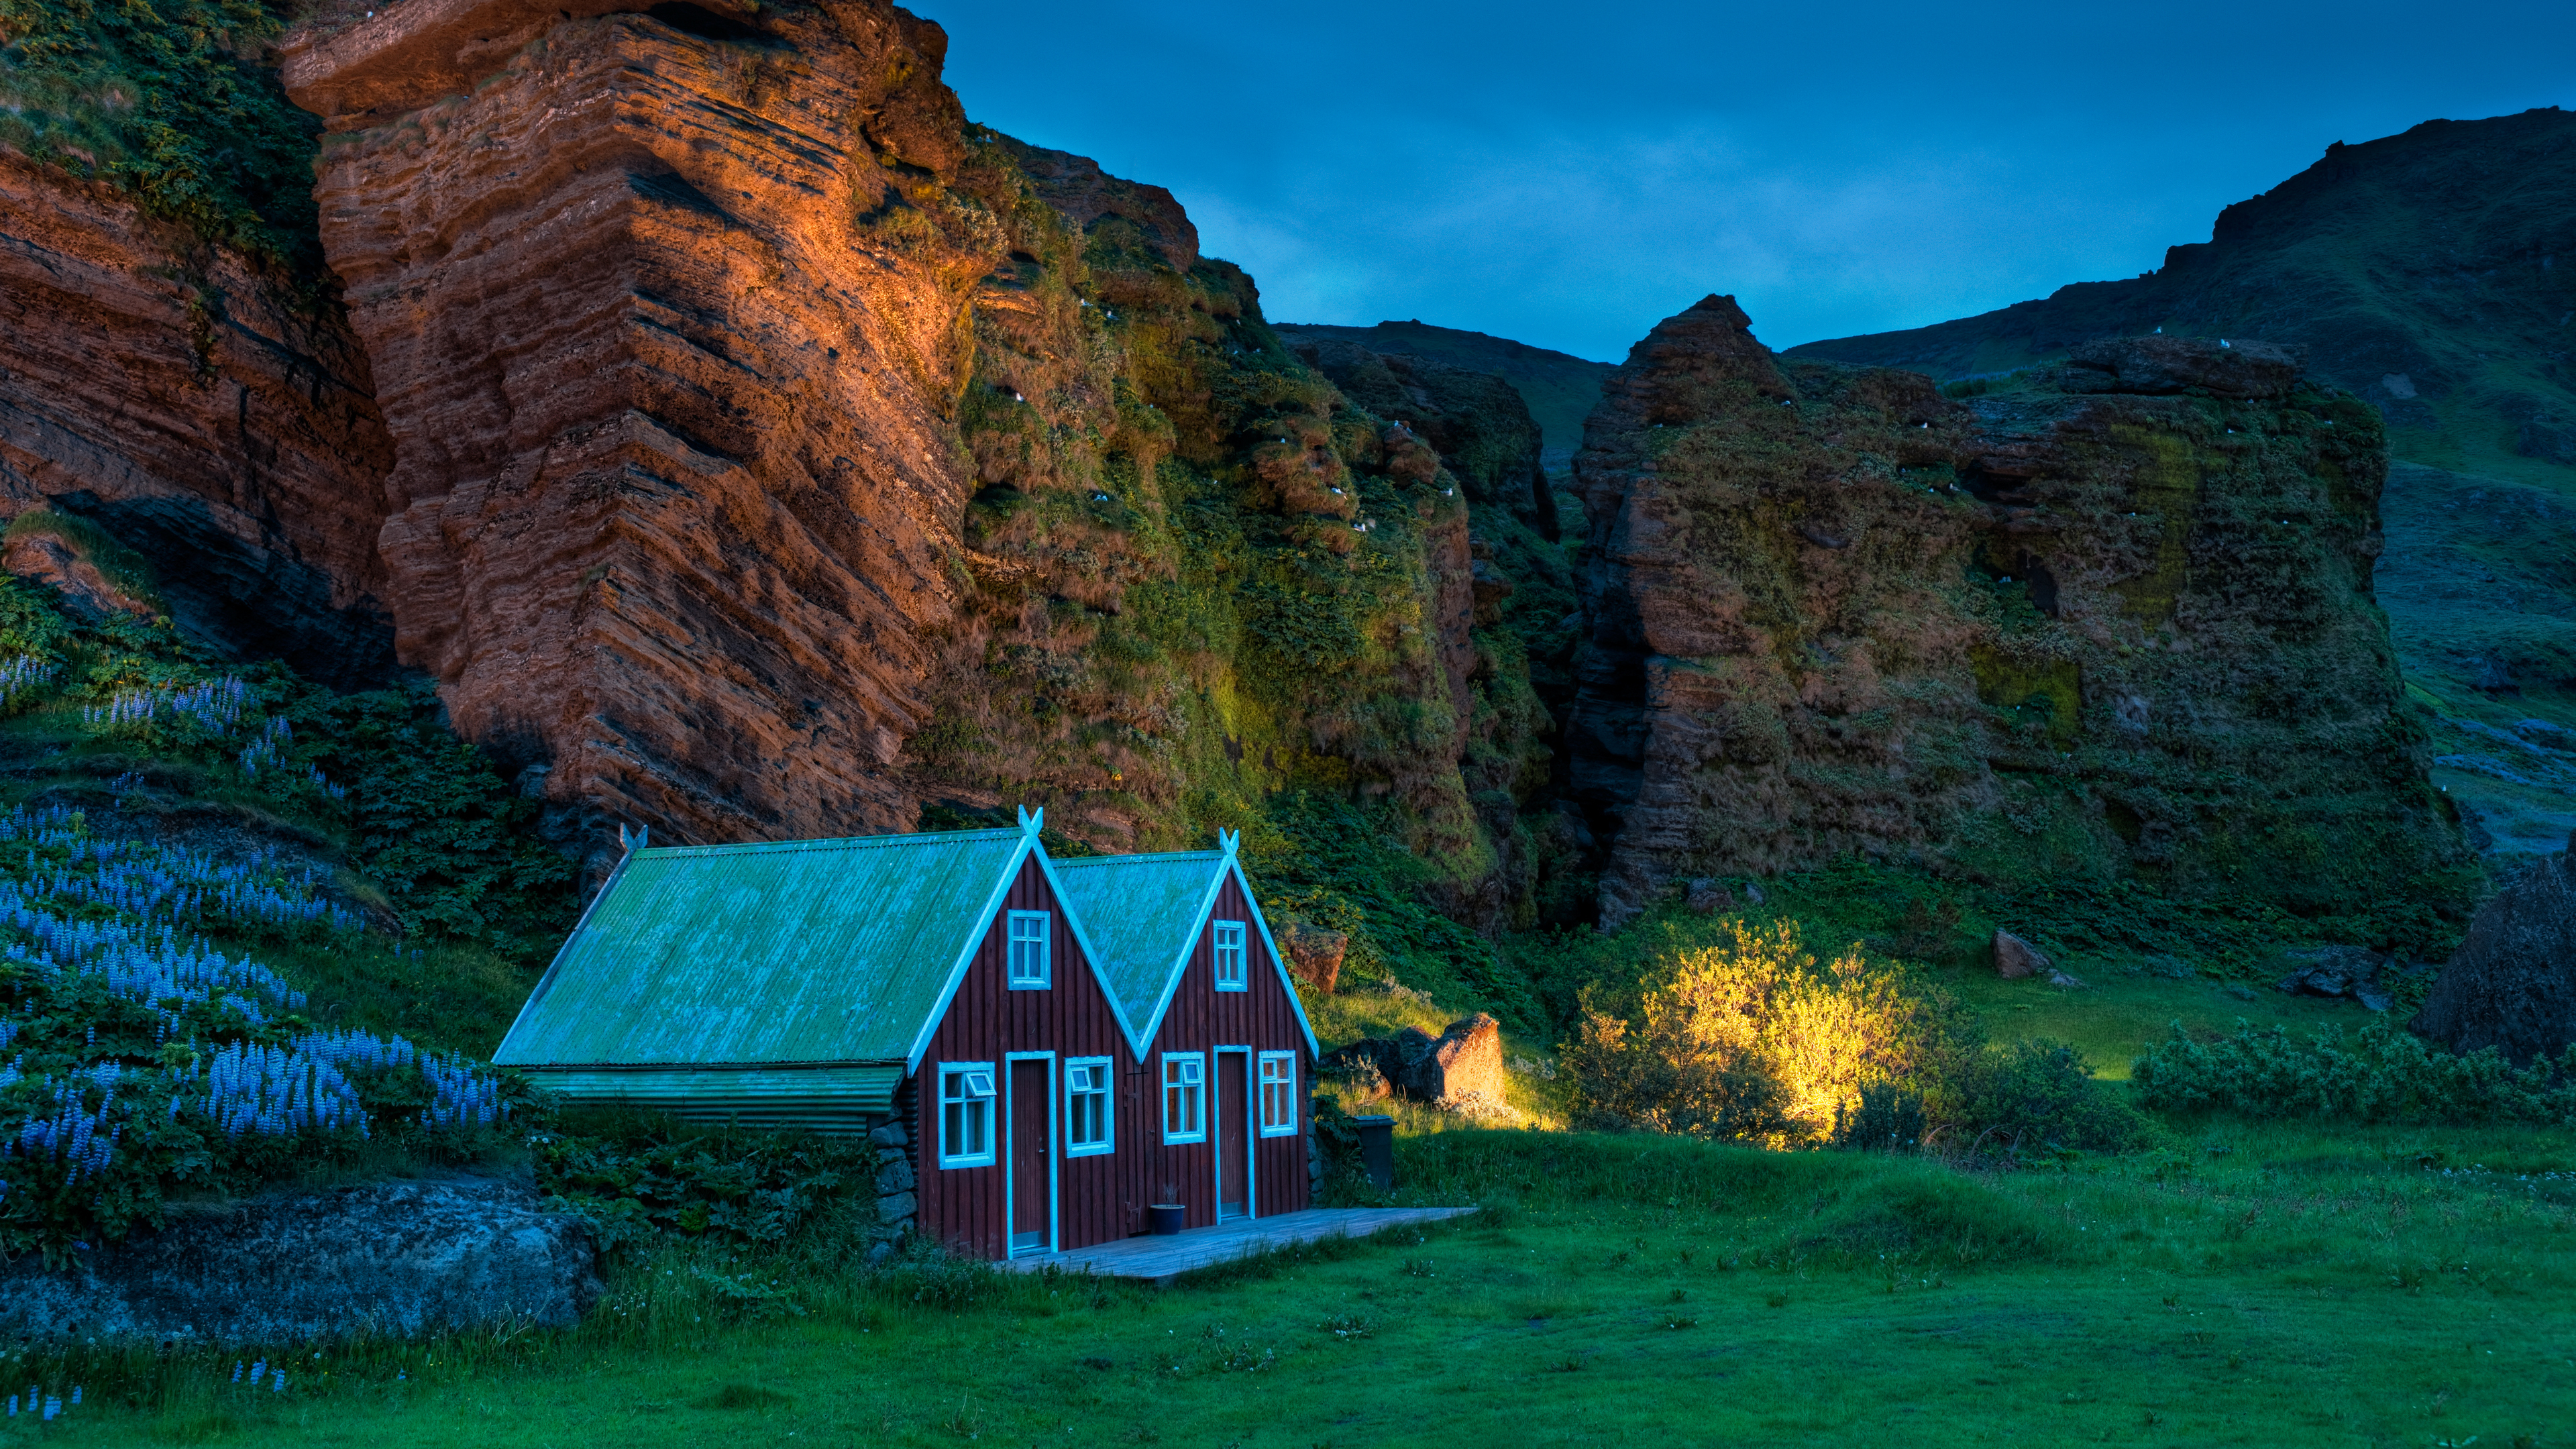 Landscape Iceland Trey Ratcliff Photography Nature Mountains Rocks House Grass Flowers Trees 3840x2160